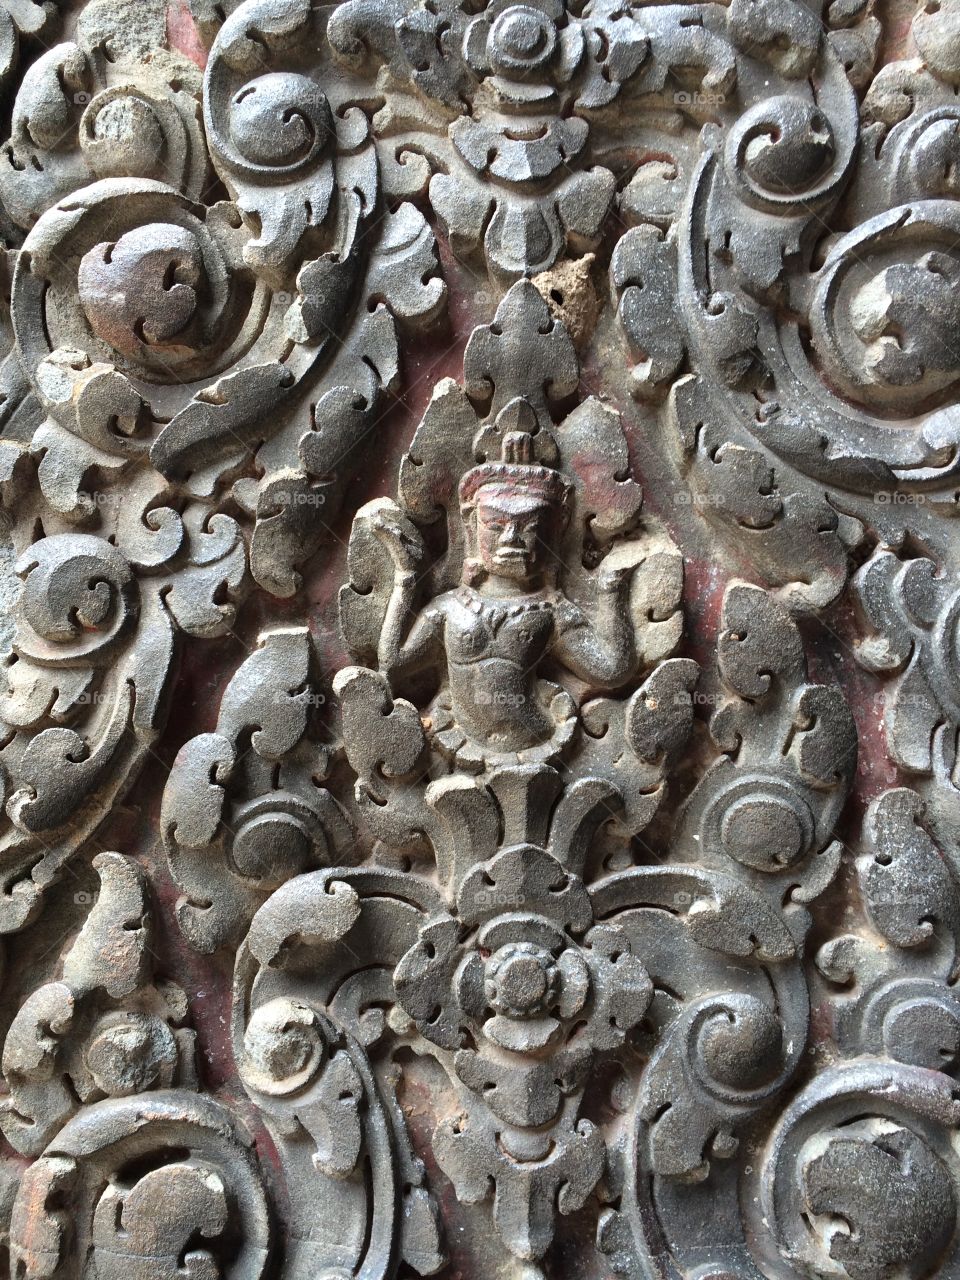 Decoration on a temple wall in Angkor, Cambodia.